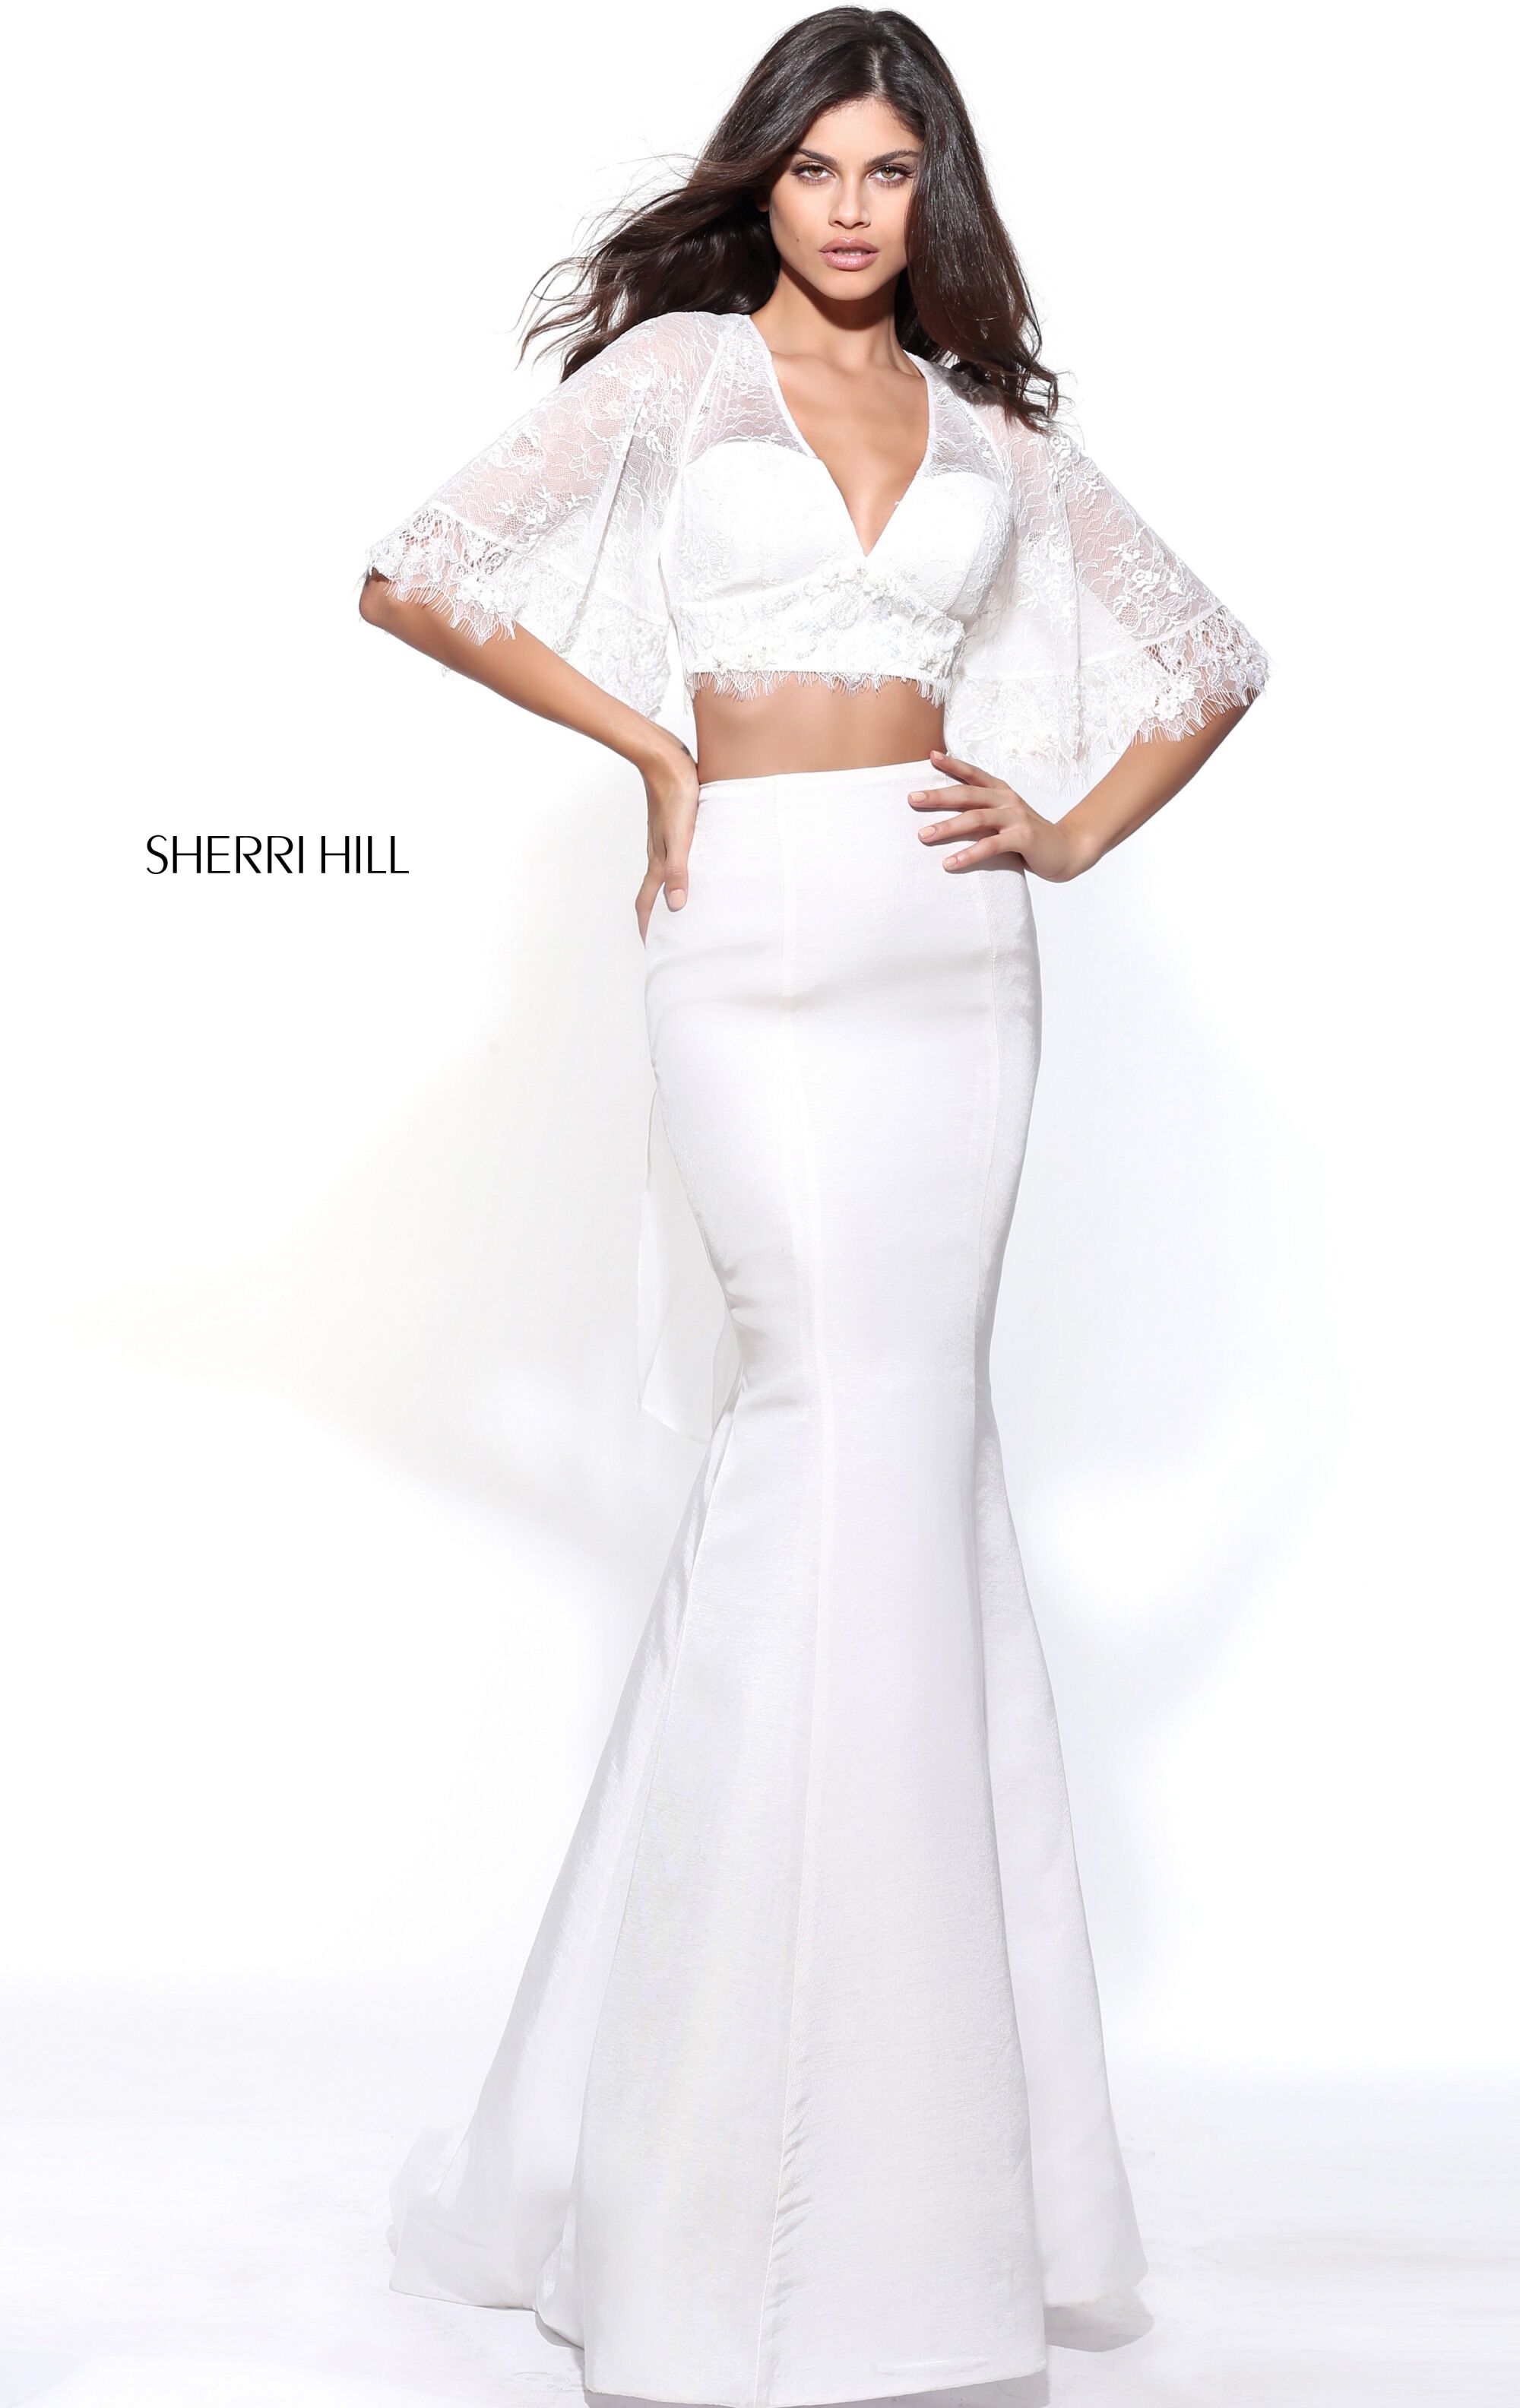 style № 50877 designed by SherriHill